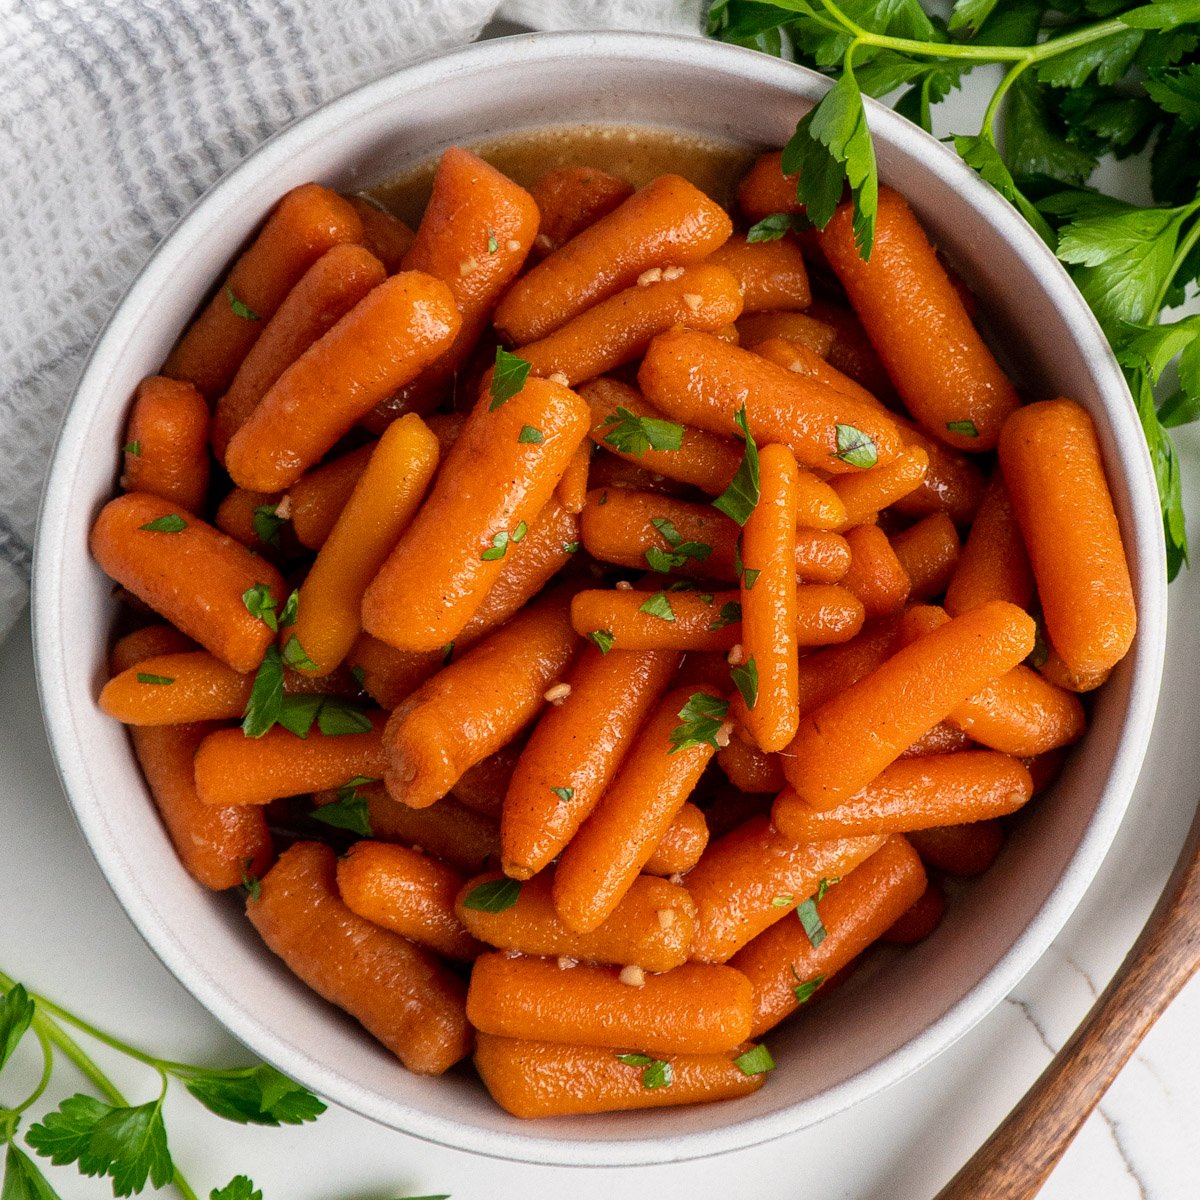 Glazed carrots in a white bowl.